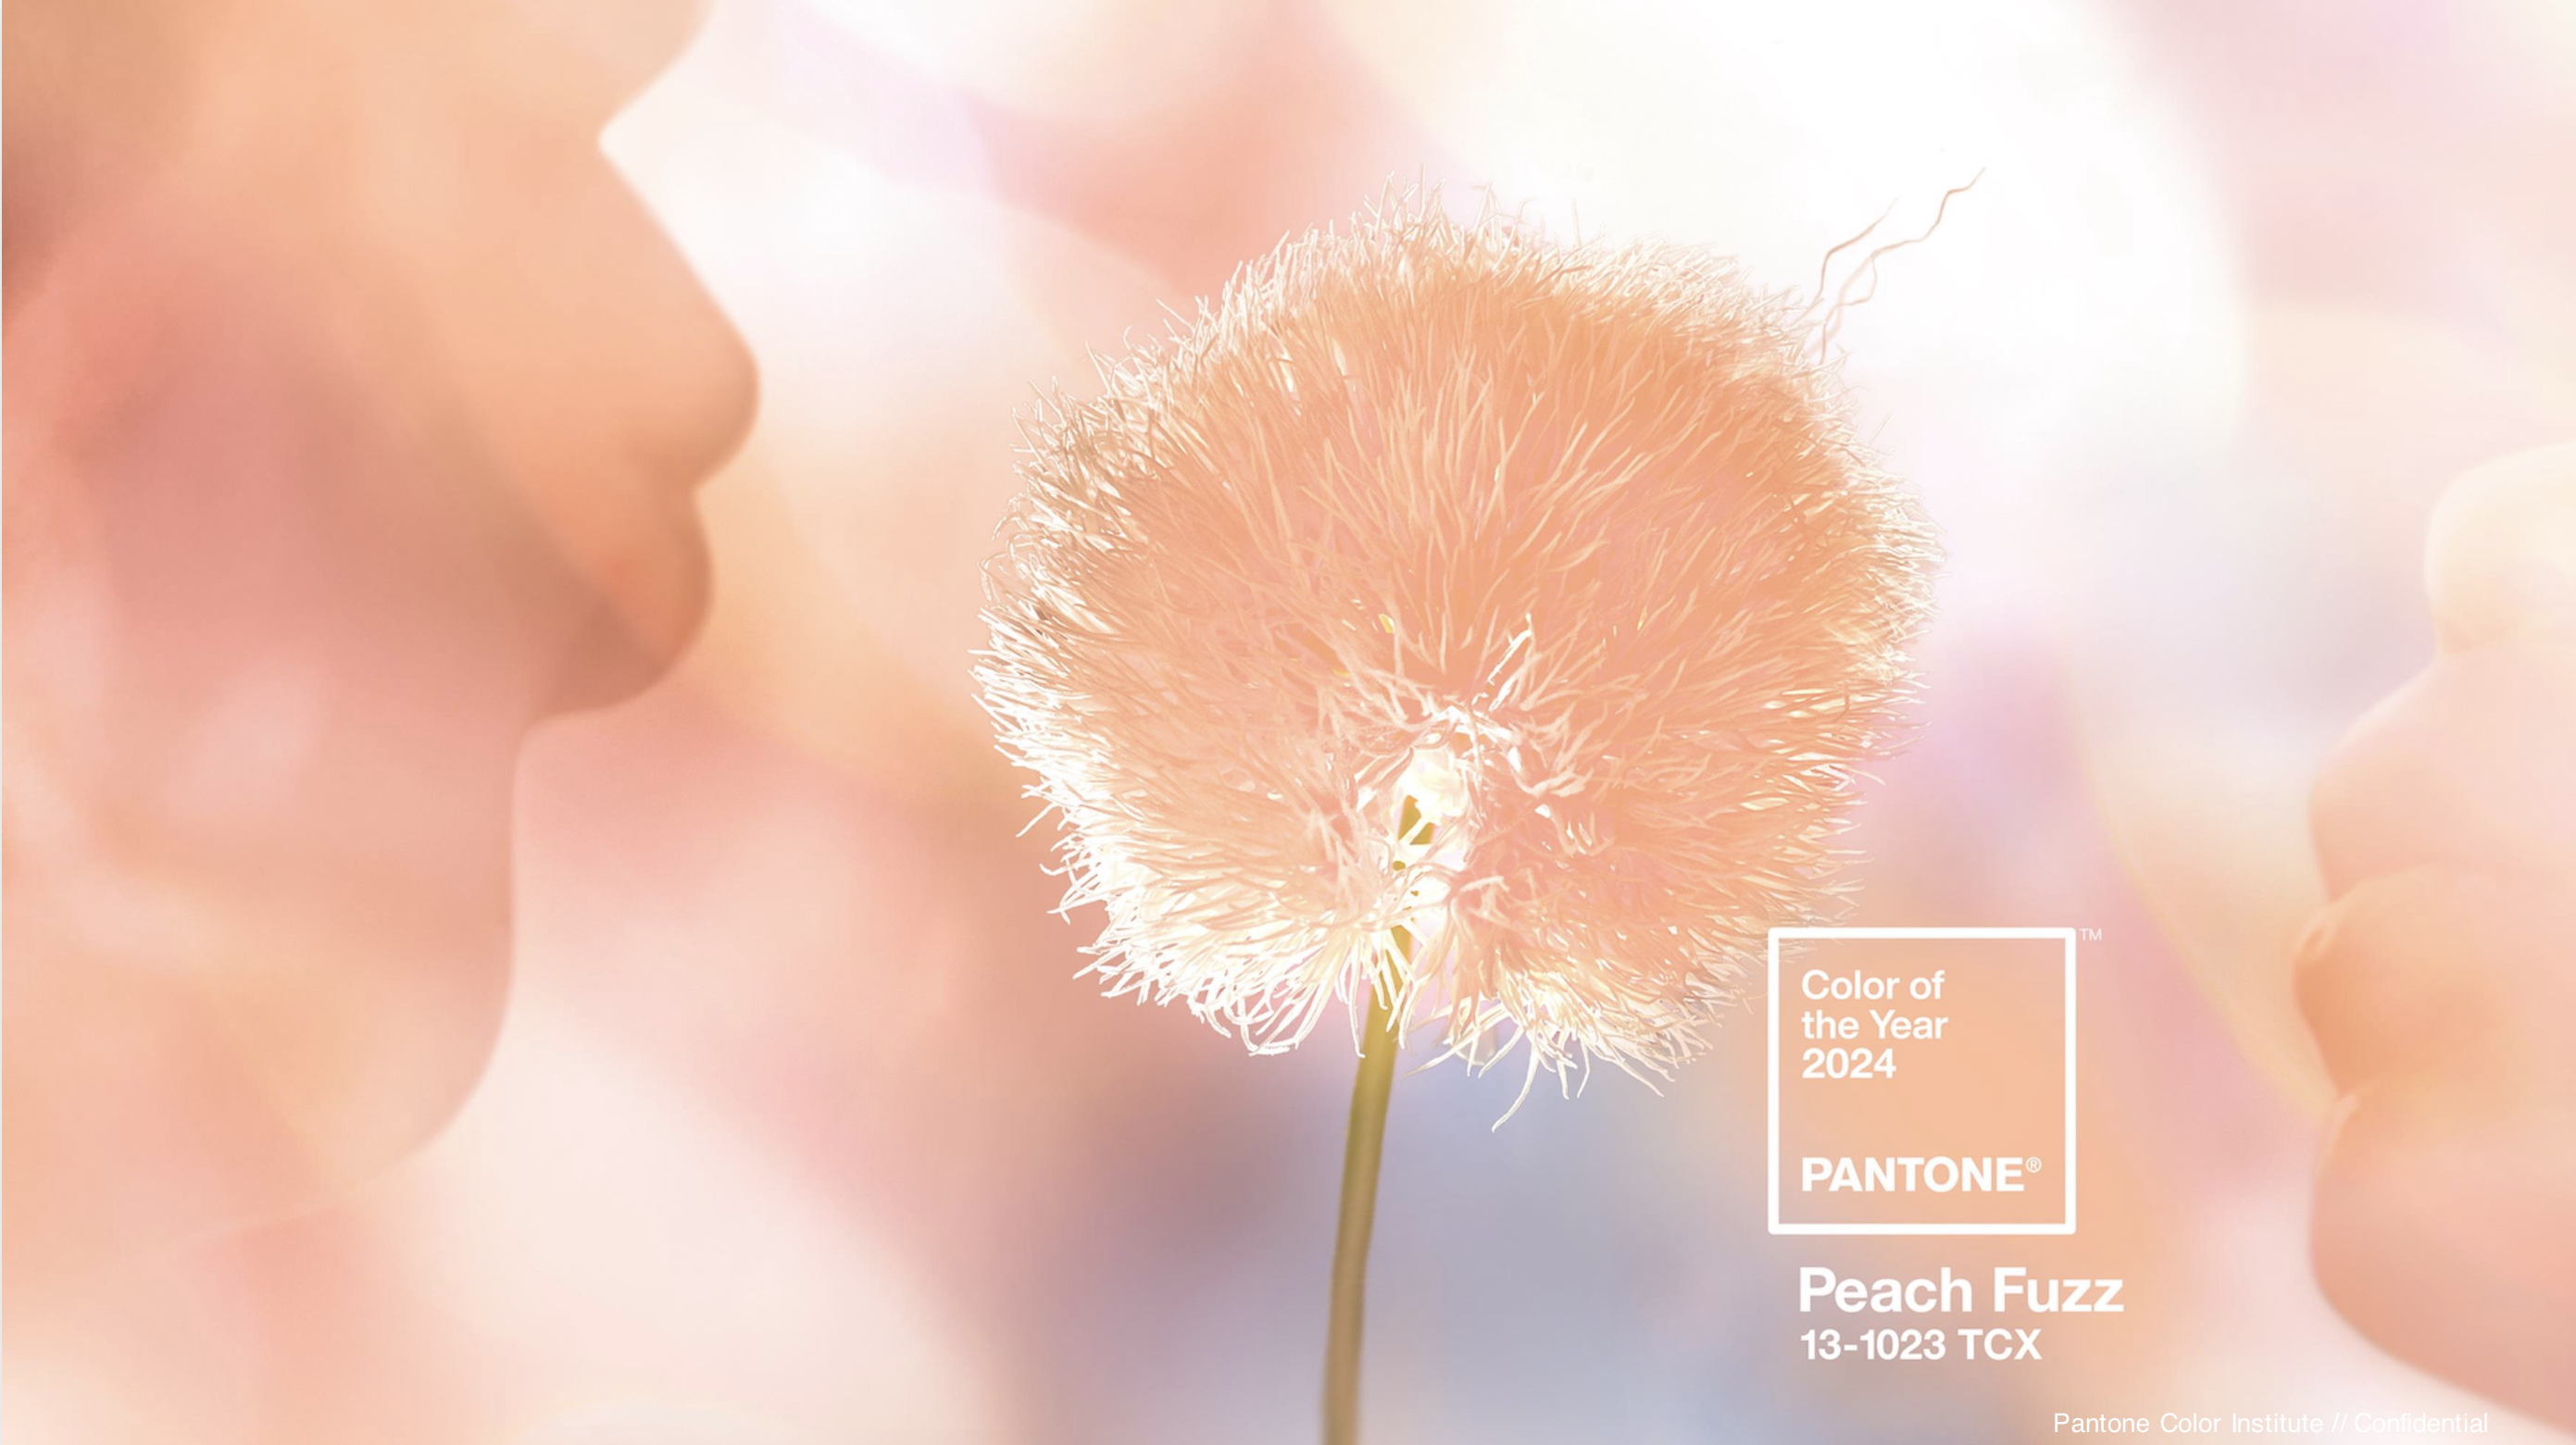 A graphic showing the Pantone Color of the Year for 2024, Peach Fuzz. It shows two people blowing on a dandelion seed head in shades of peach